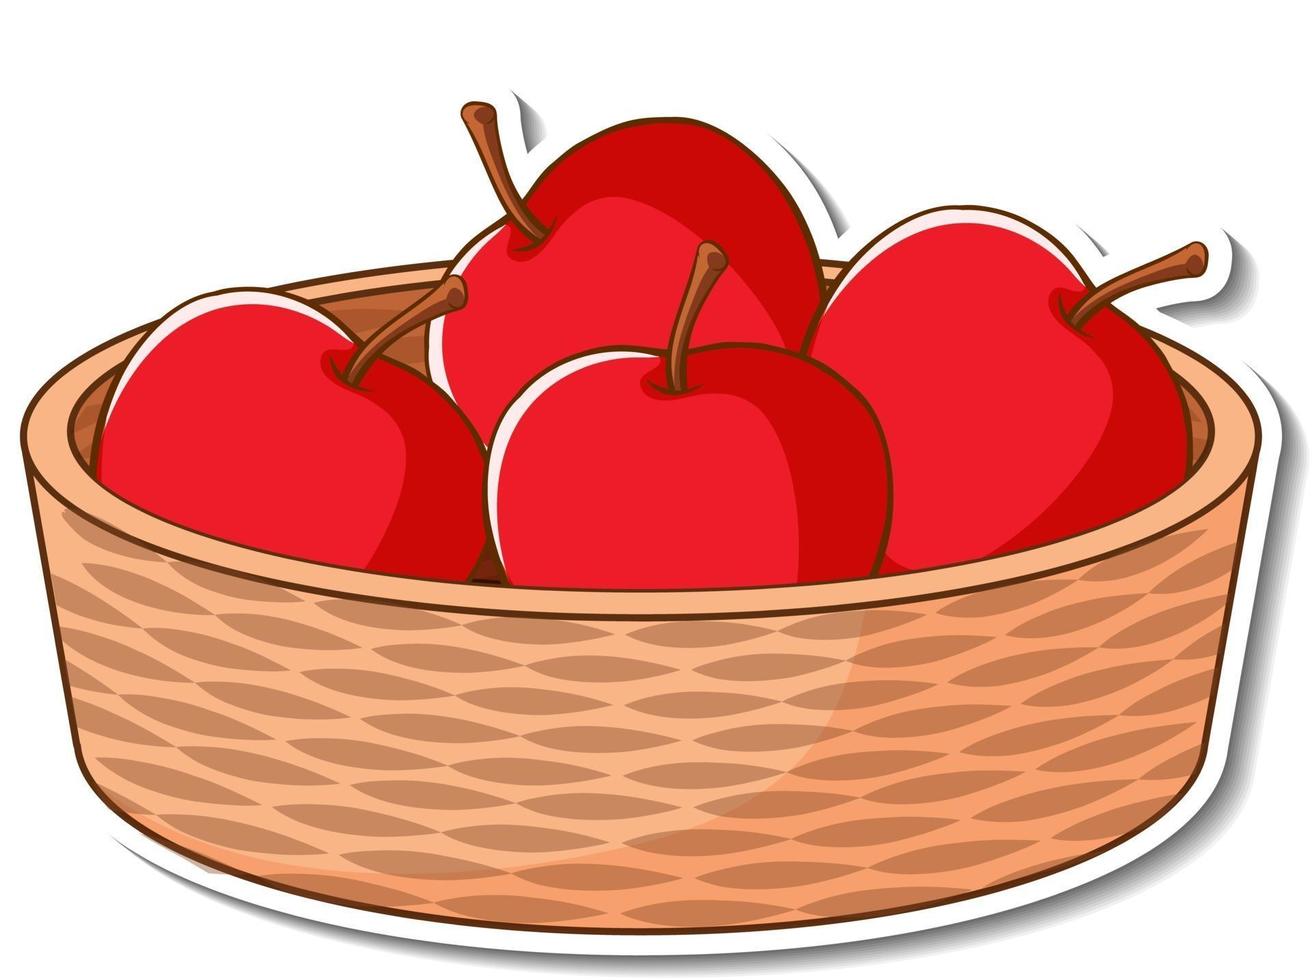 Sticker basket with many red apples vector